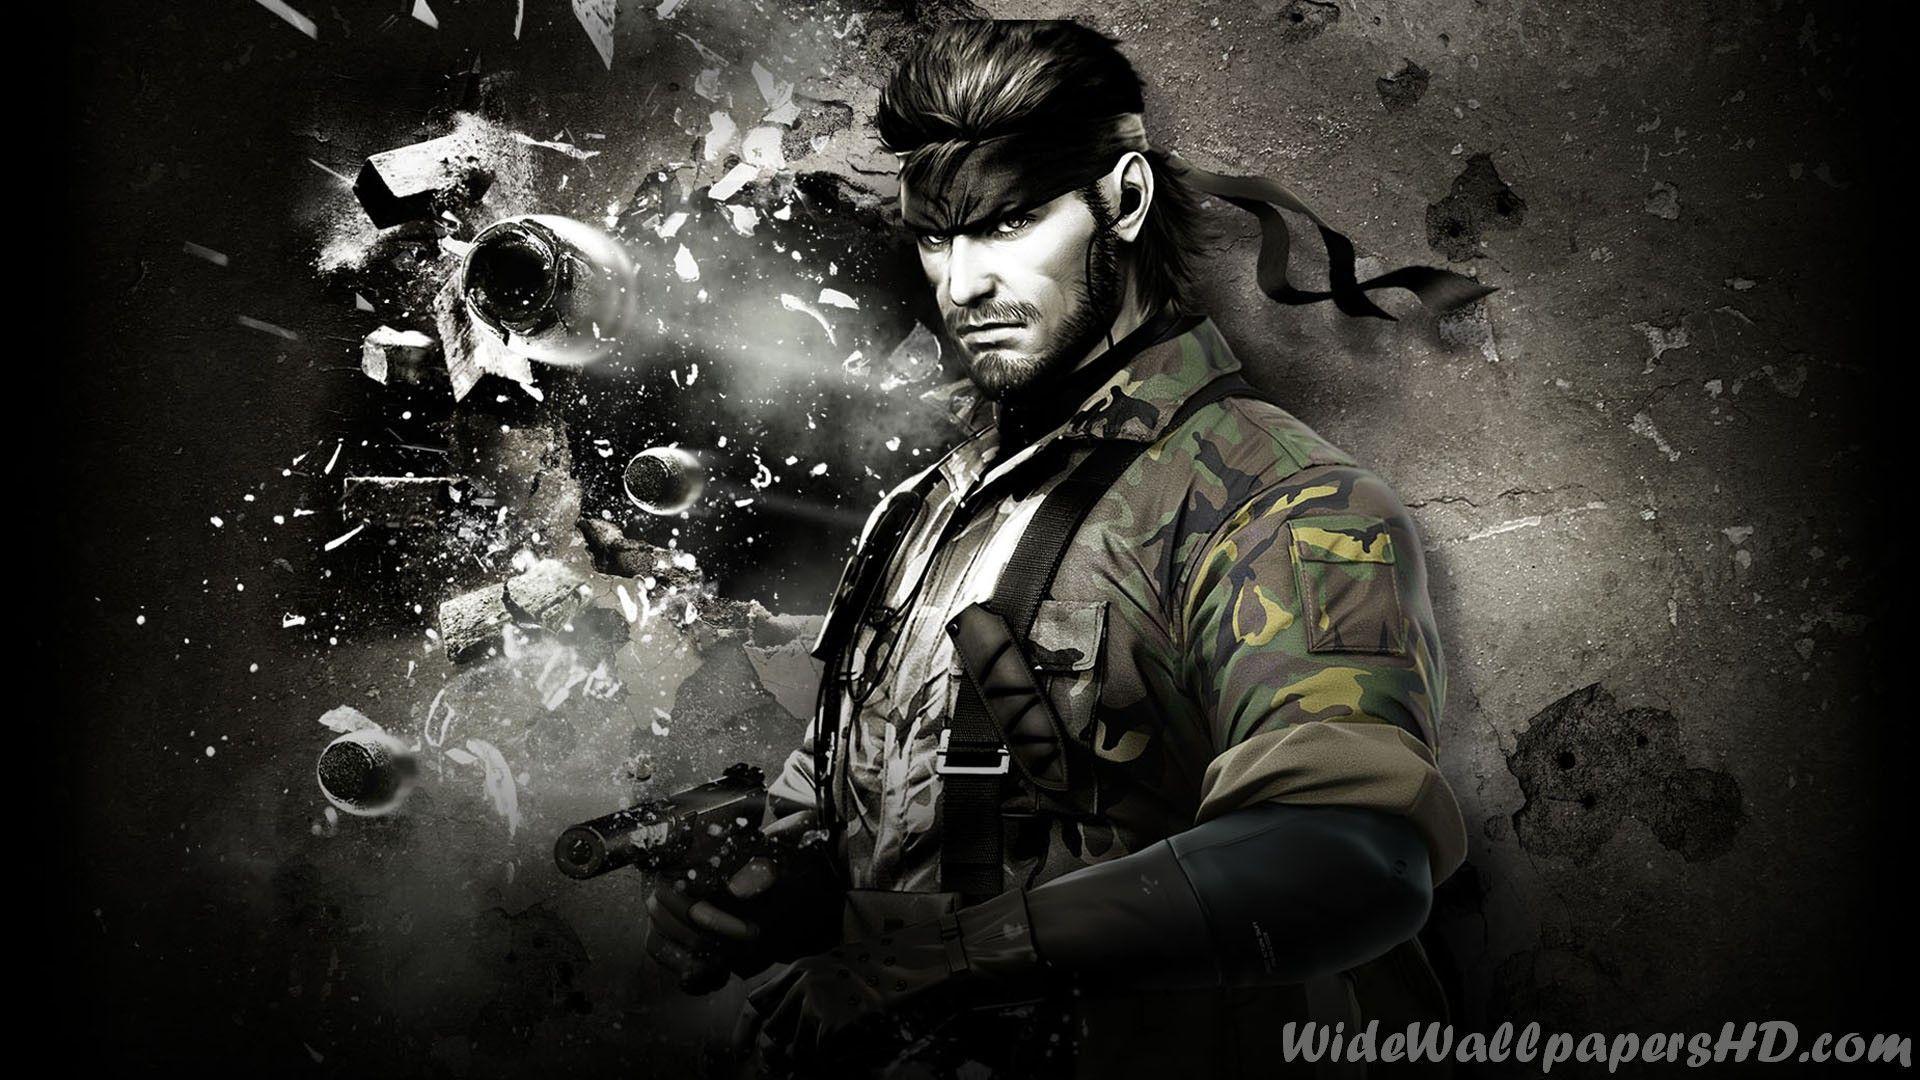 image For > Mgs3 Wallpaper 1080p